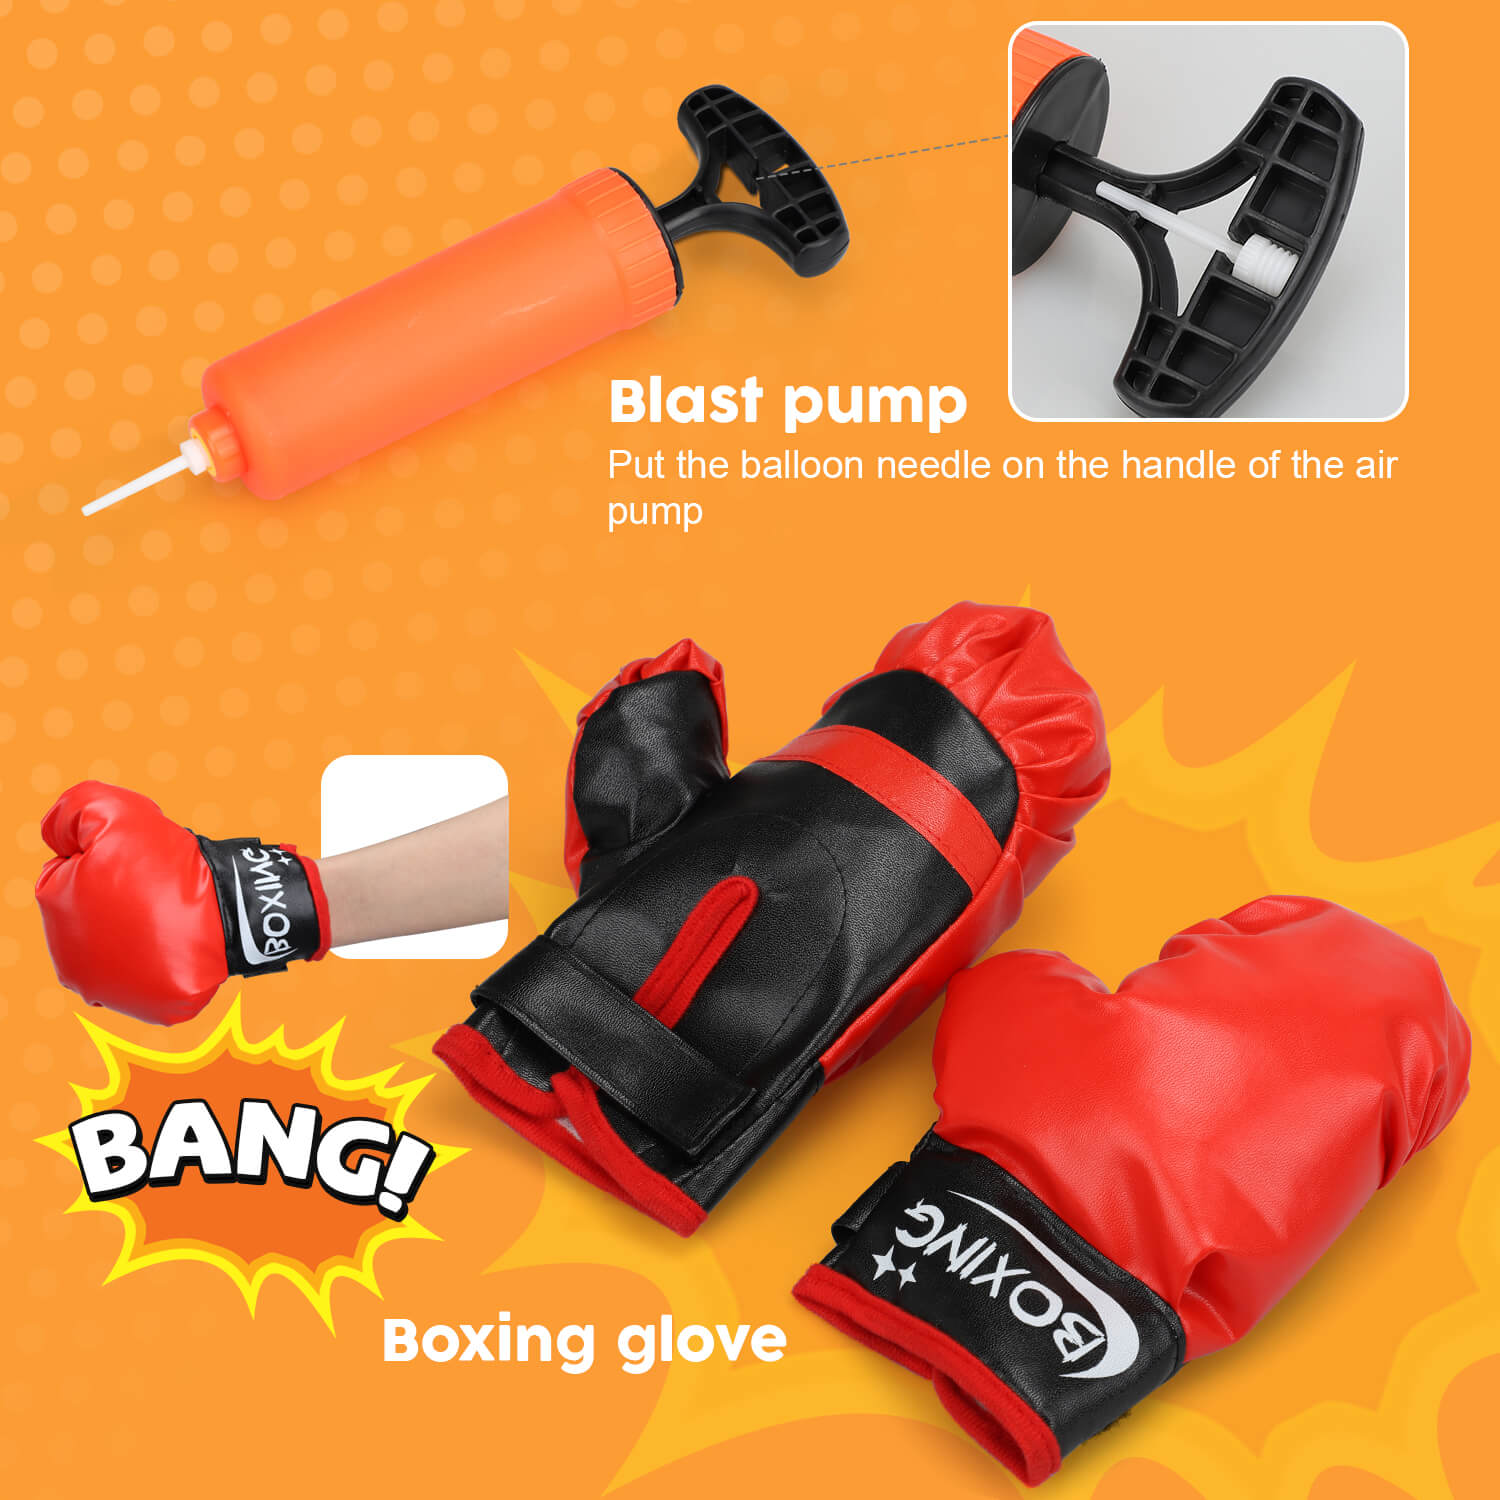 FUN LITTLE TOYS Punching Bag for Kids with Boxing Gloves, Ages 3